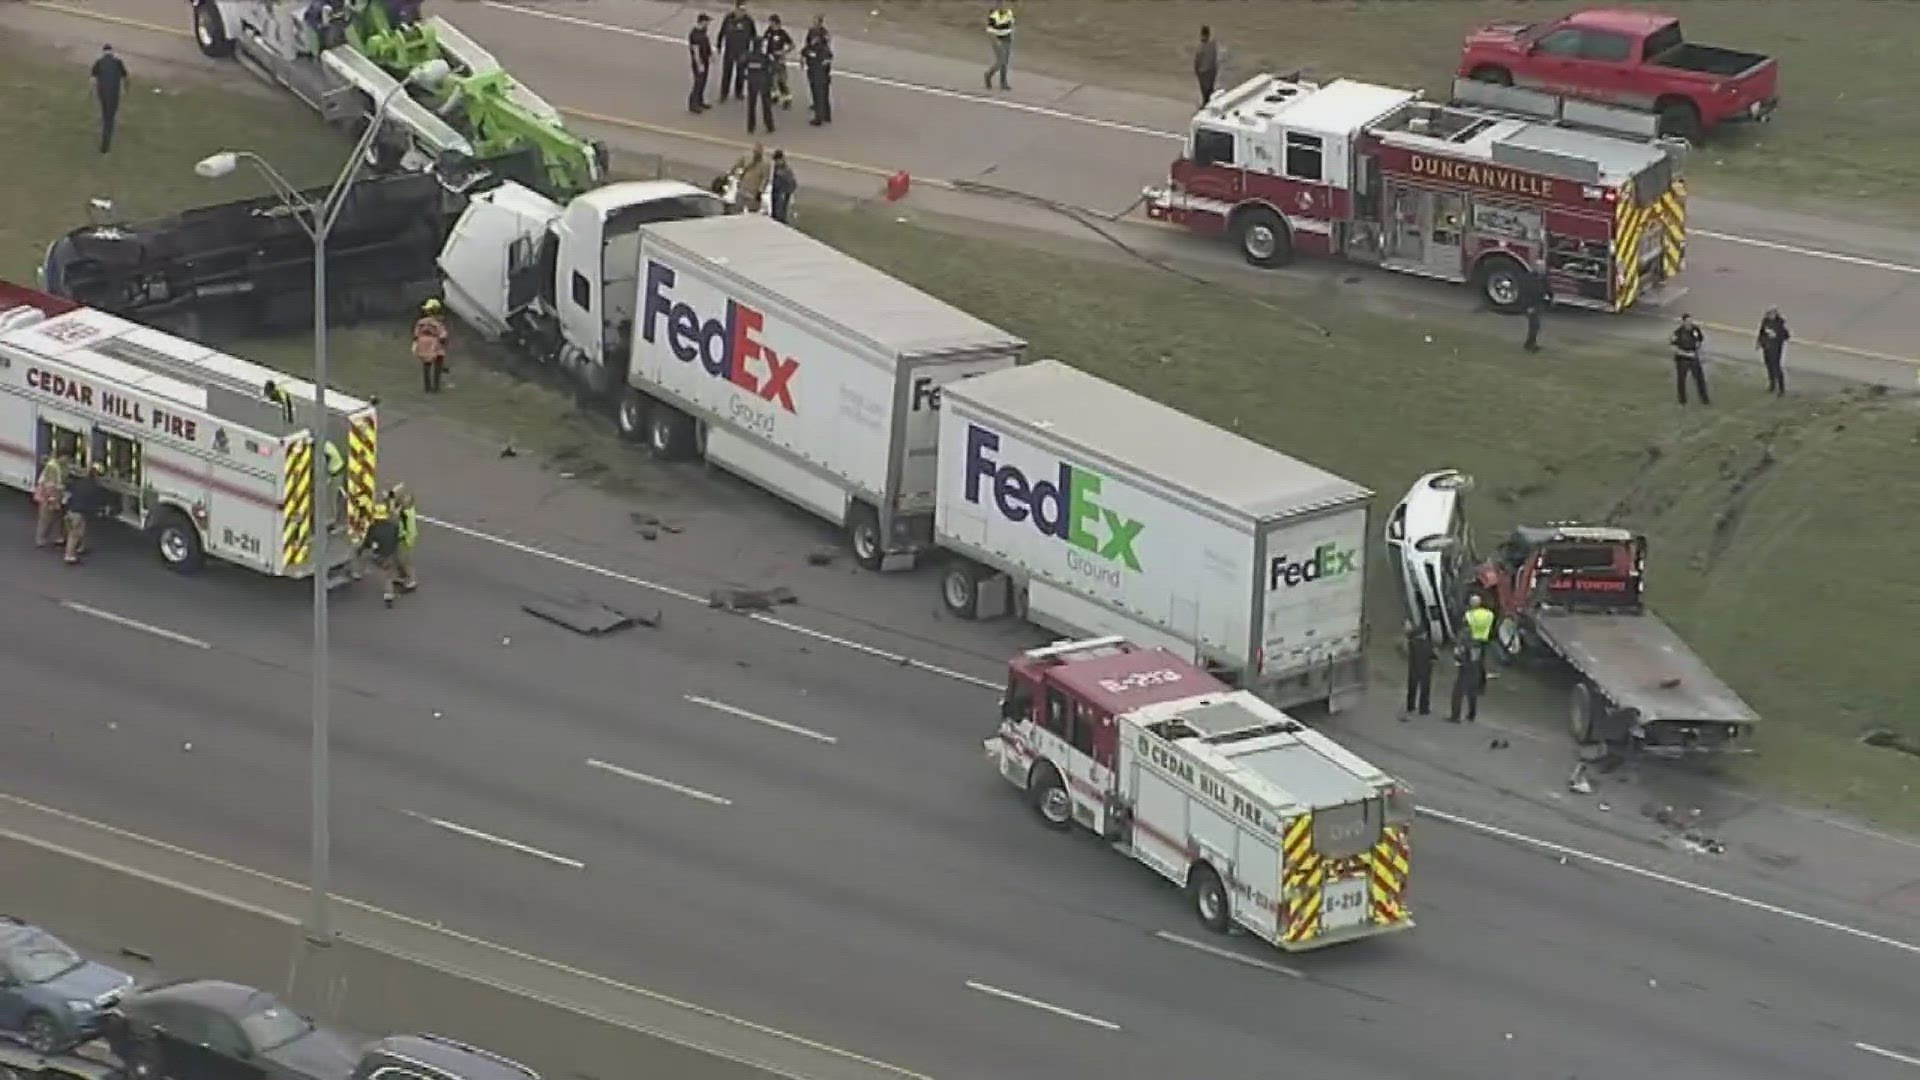 One killed in crash on I-20 and Cedar Ridge in Duncanville, officials say